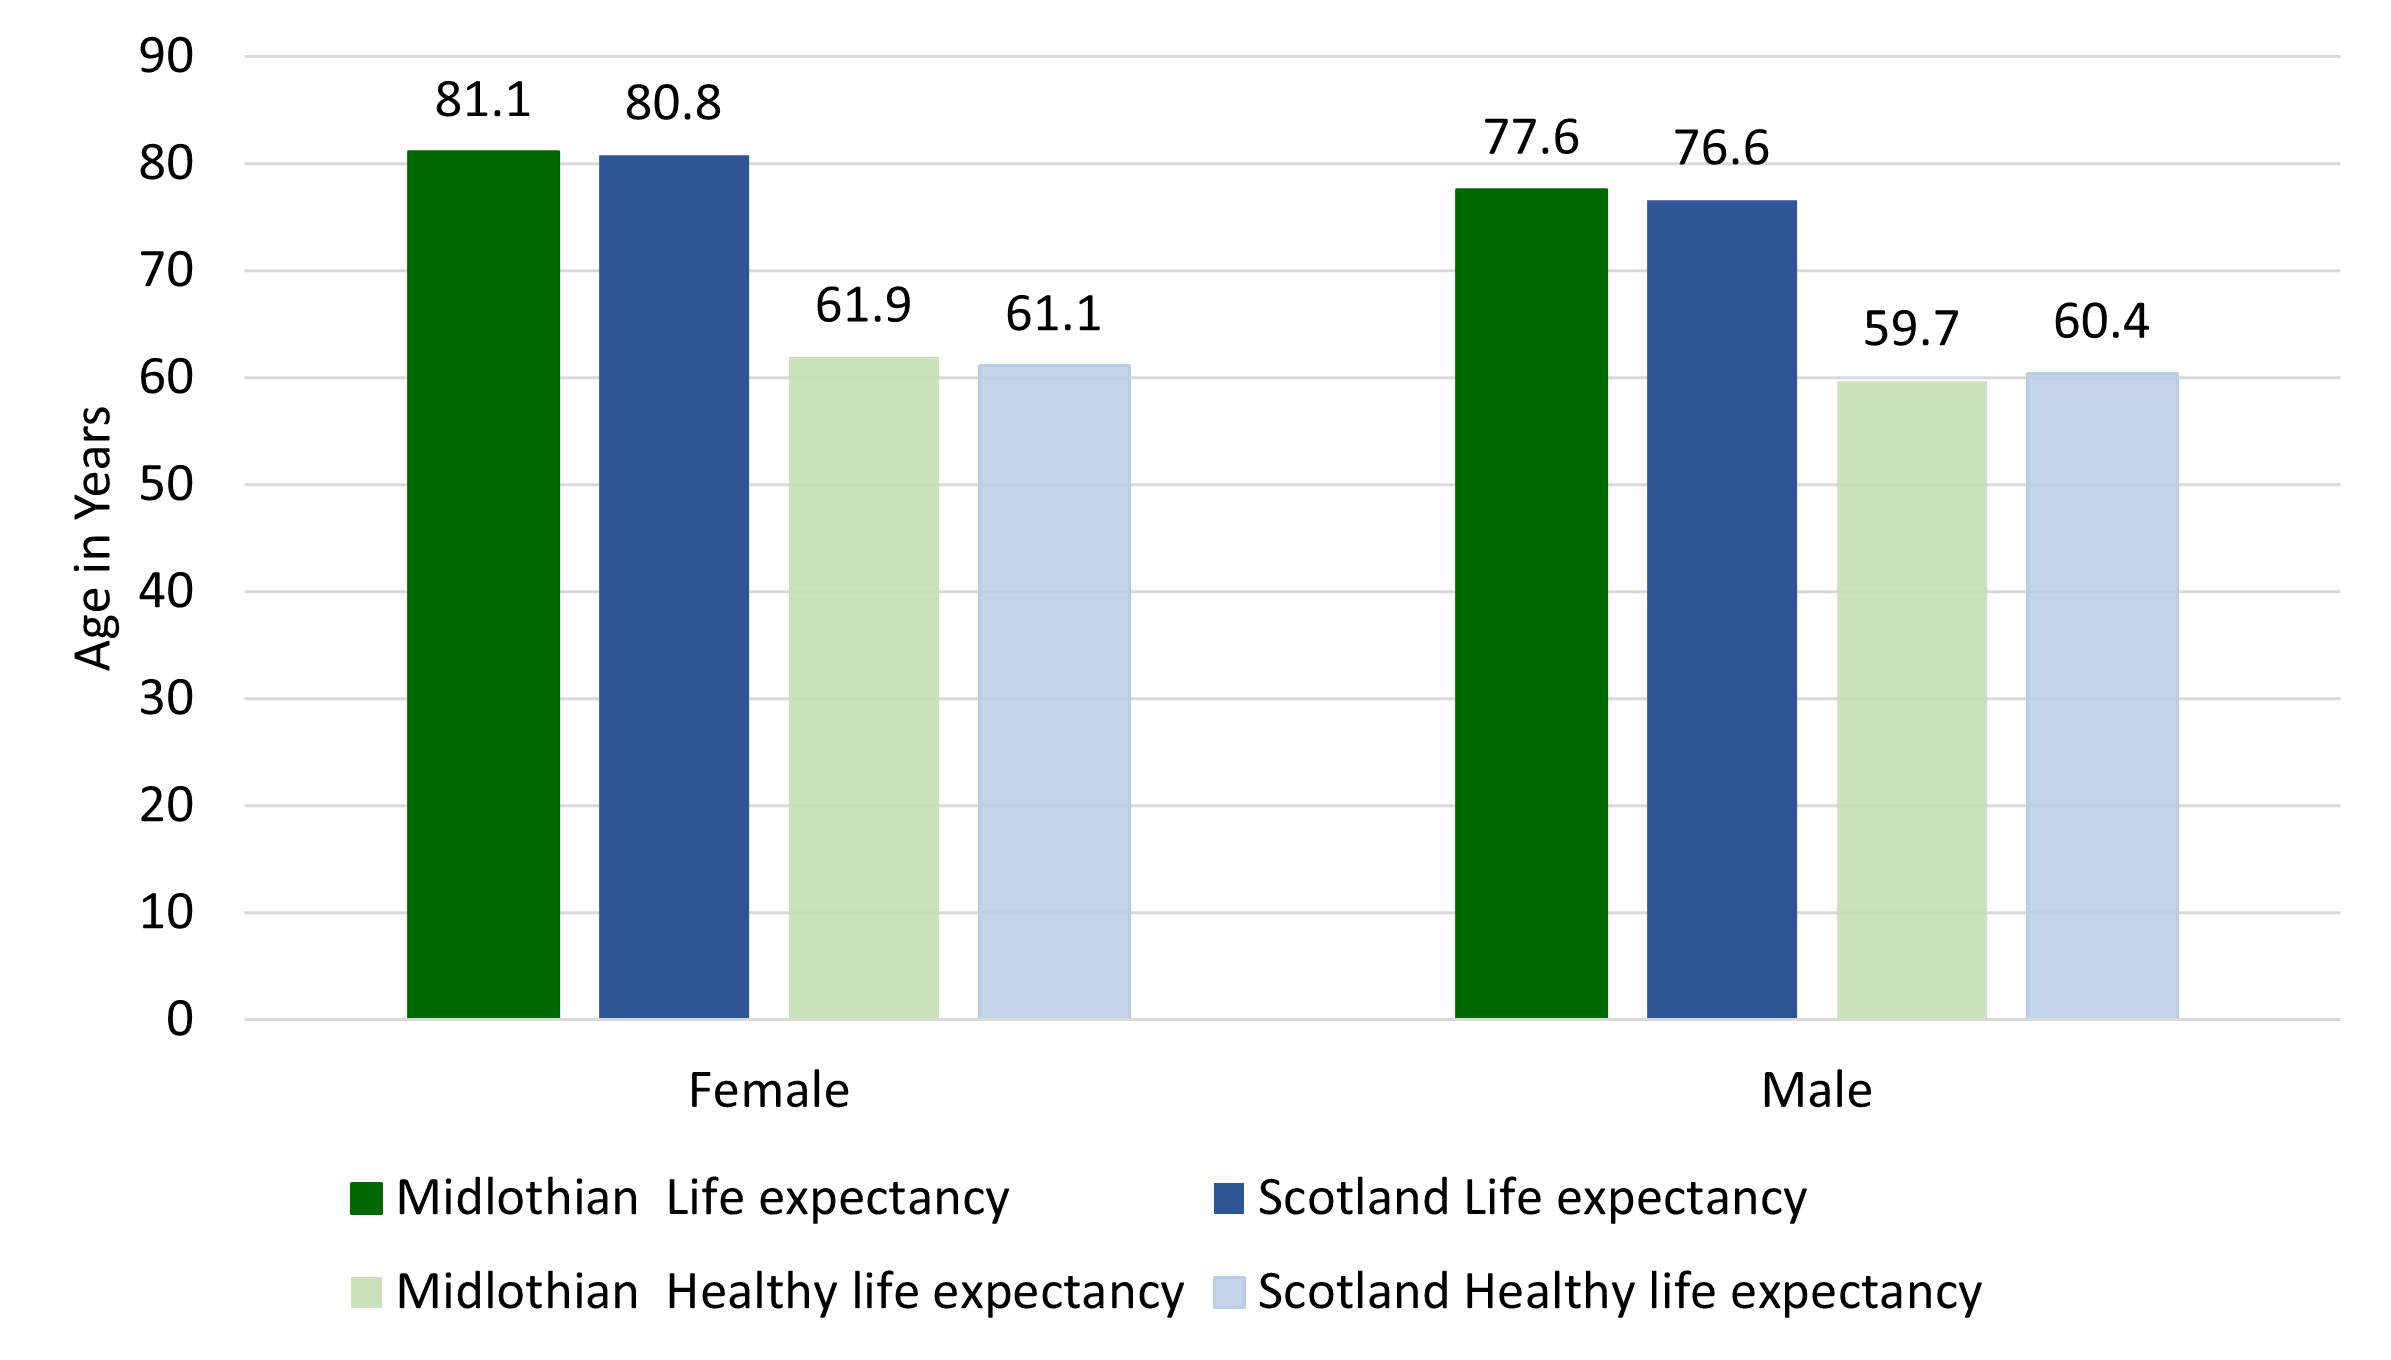 Female and male life and healthy life expectancy at birth in years for 2019-2021